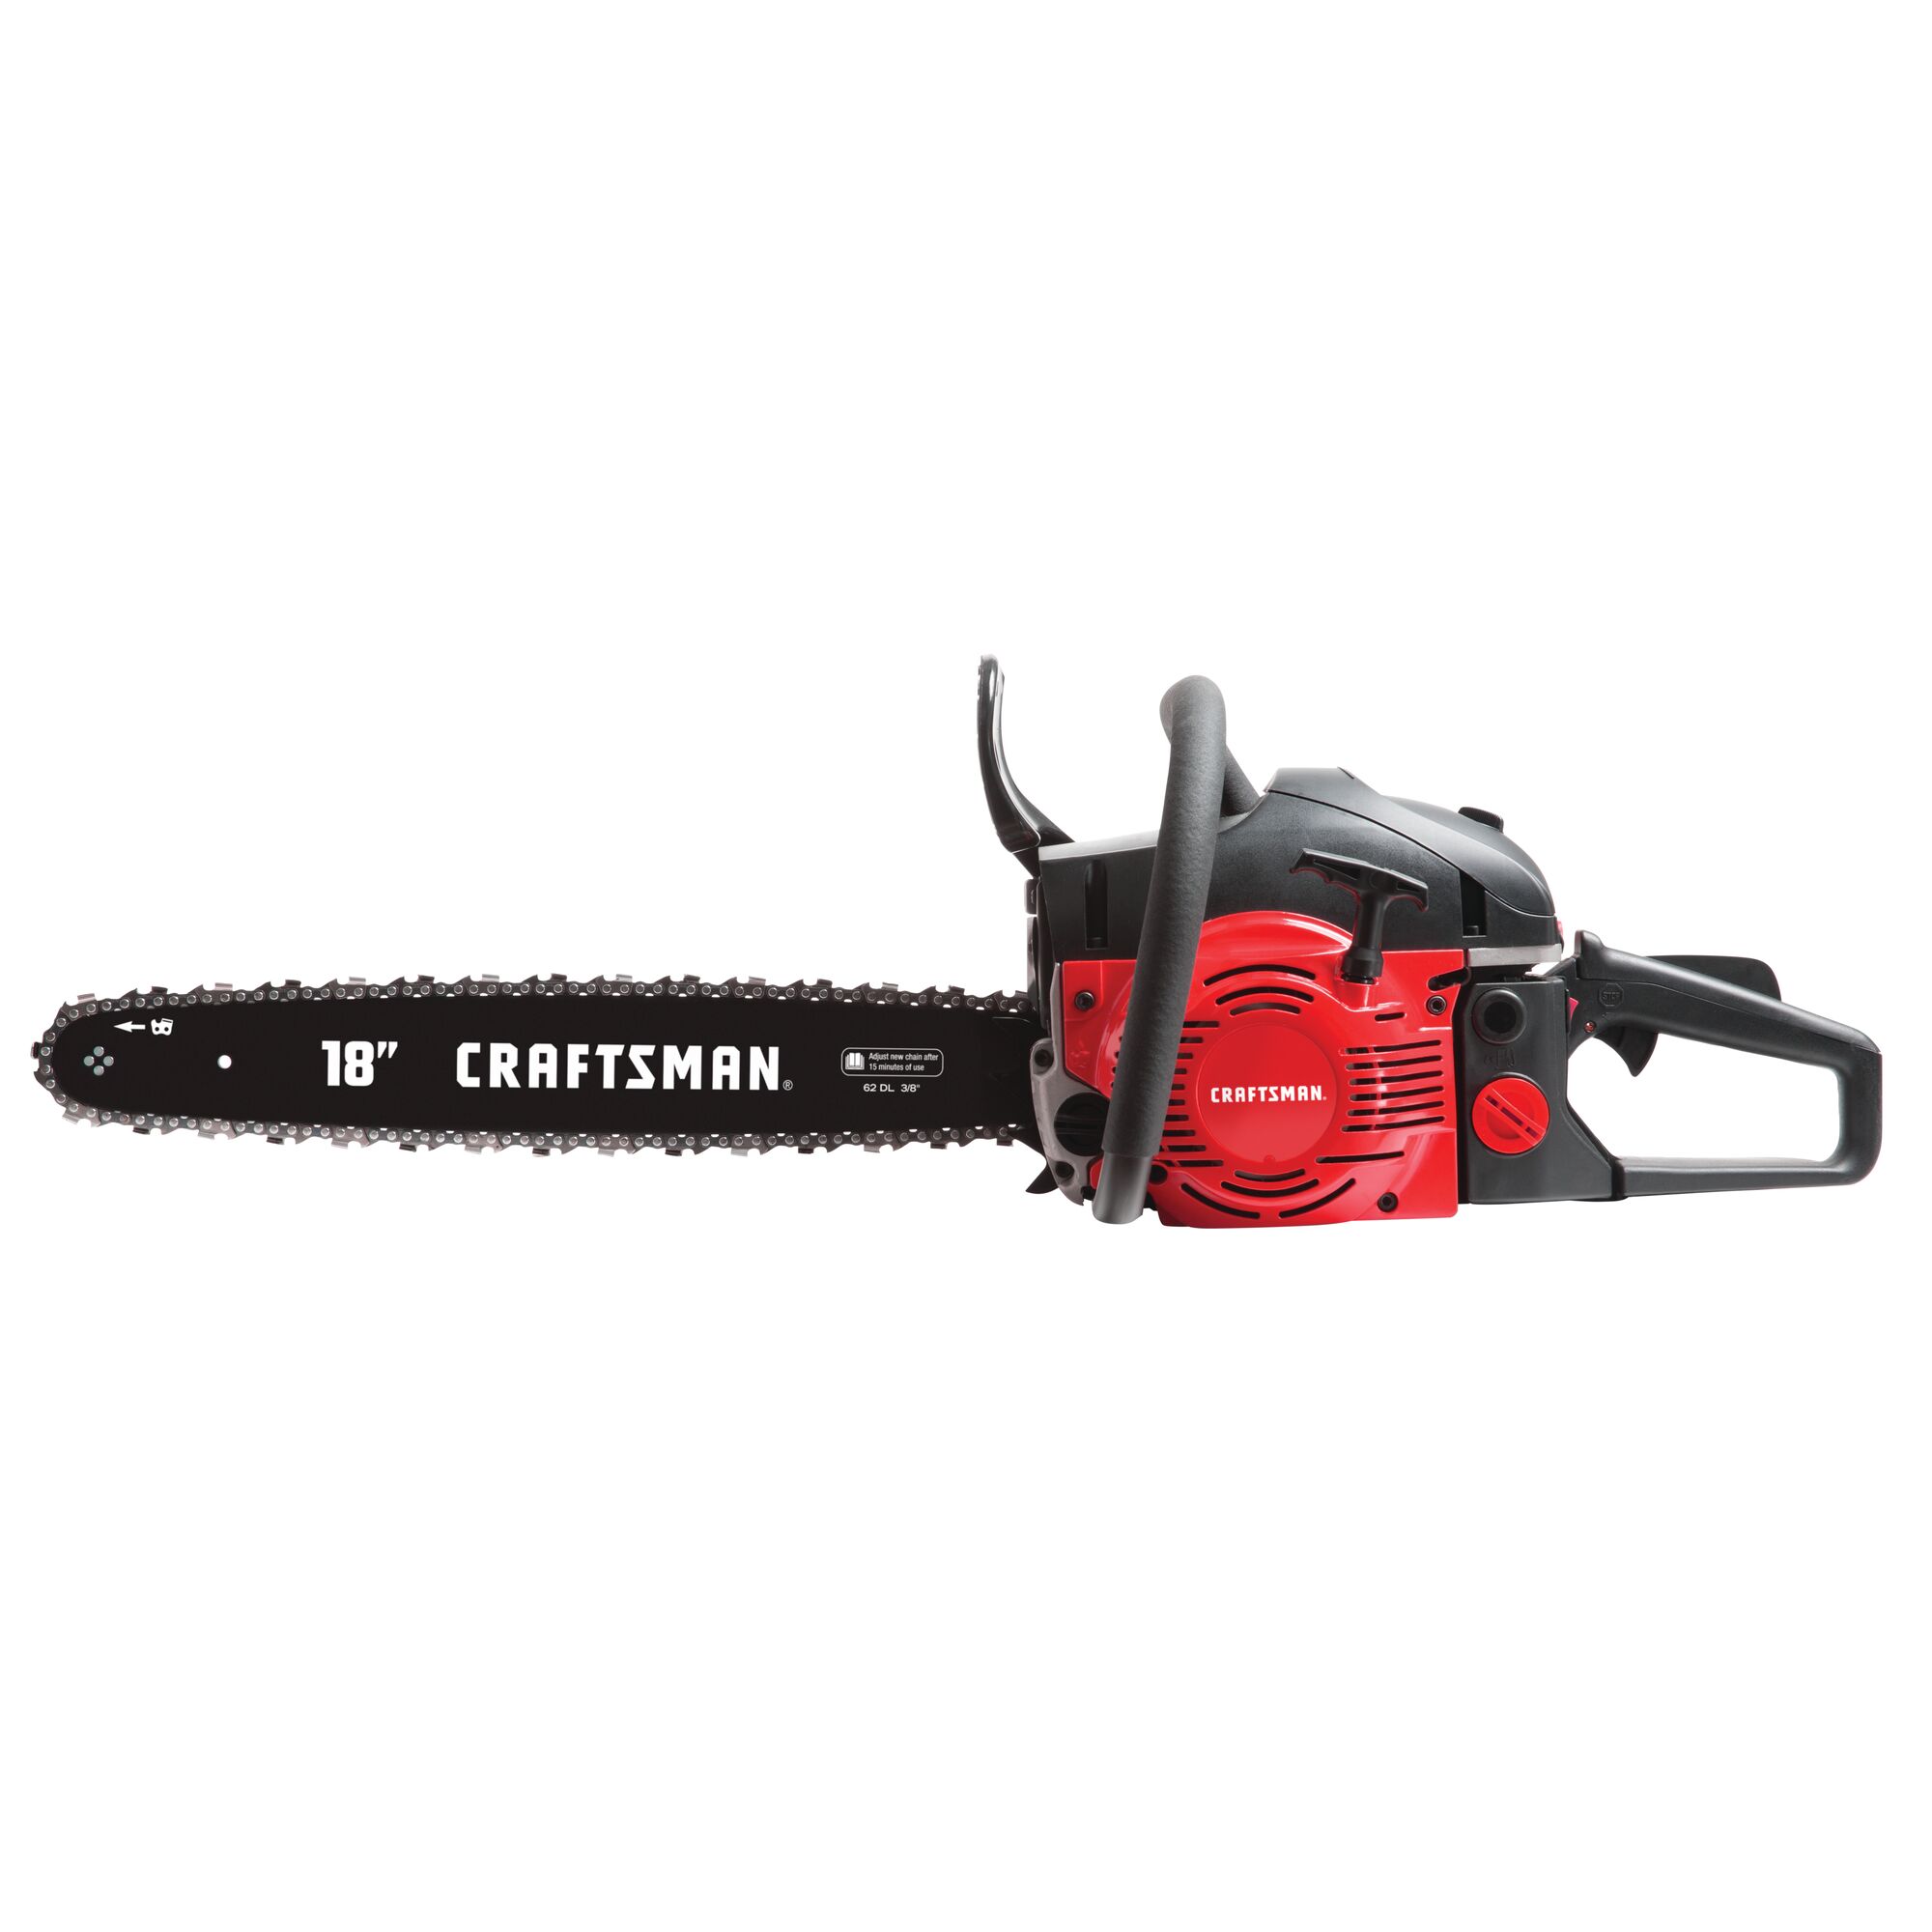 18 inch 2 Cycle chainsaw.